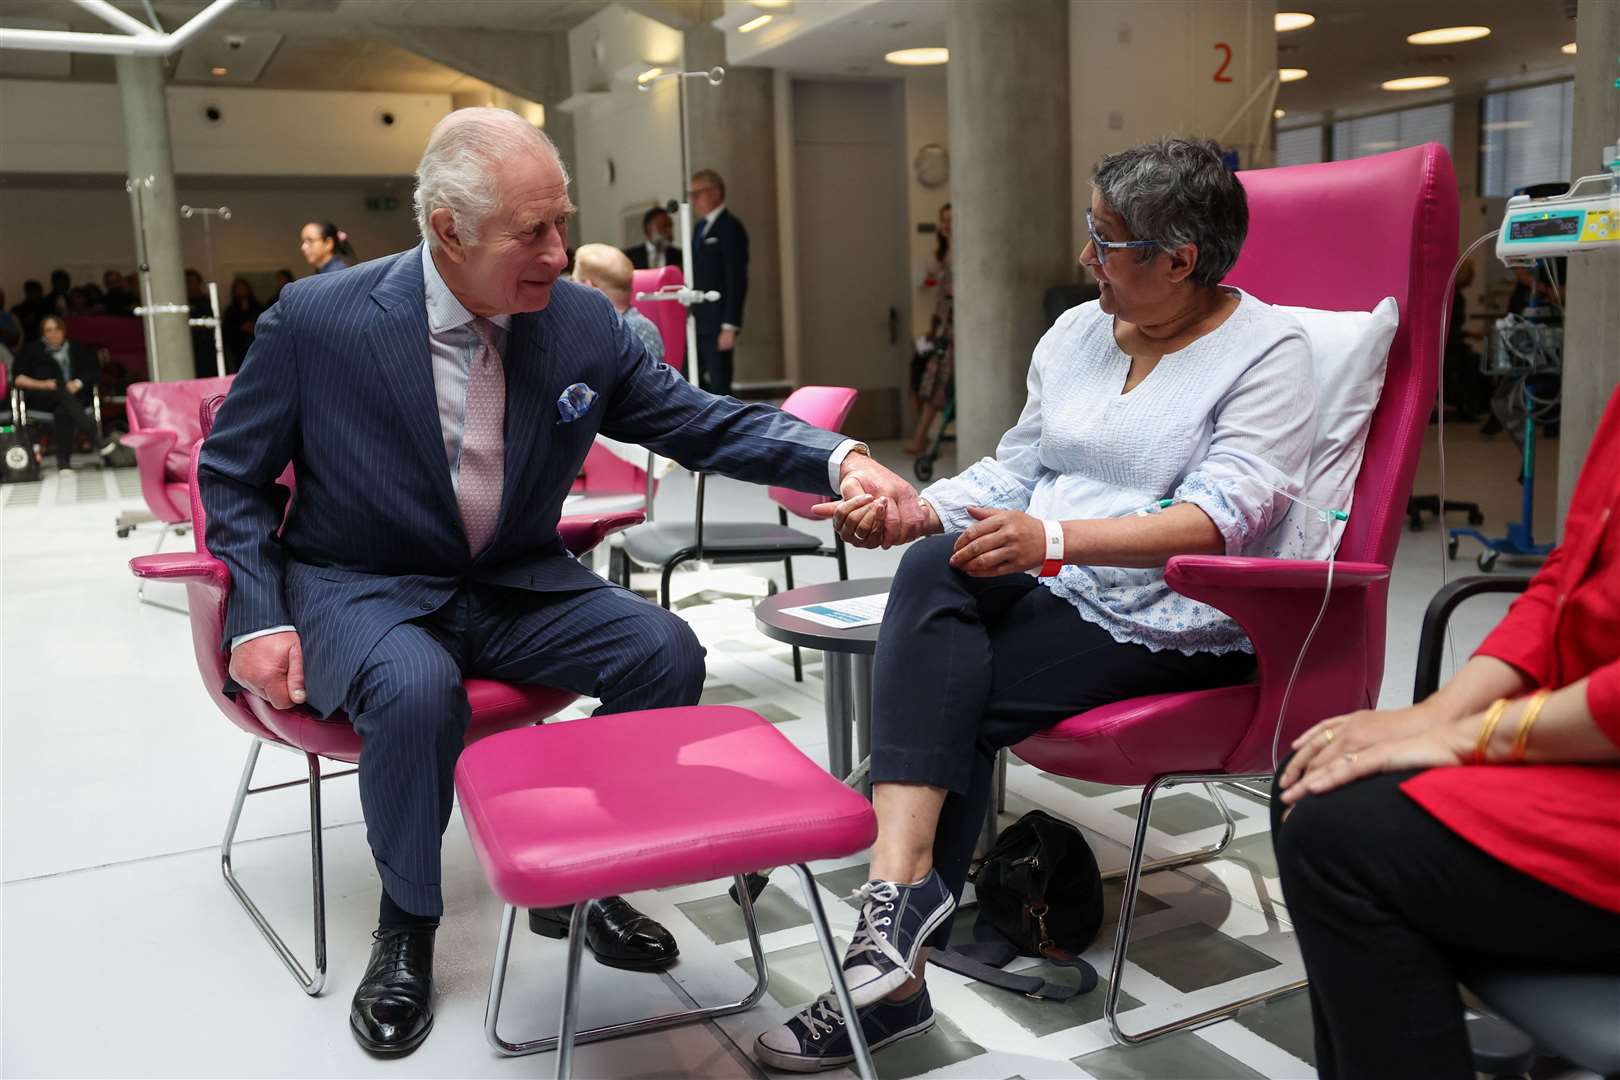 Charles, patron of Cancer Research UK and Macmillan Cancer Support, met patients during a recent visit to University College Hospital Macmillan Cancer Centre (Suzanne Plunkett/PA)